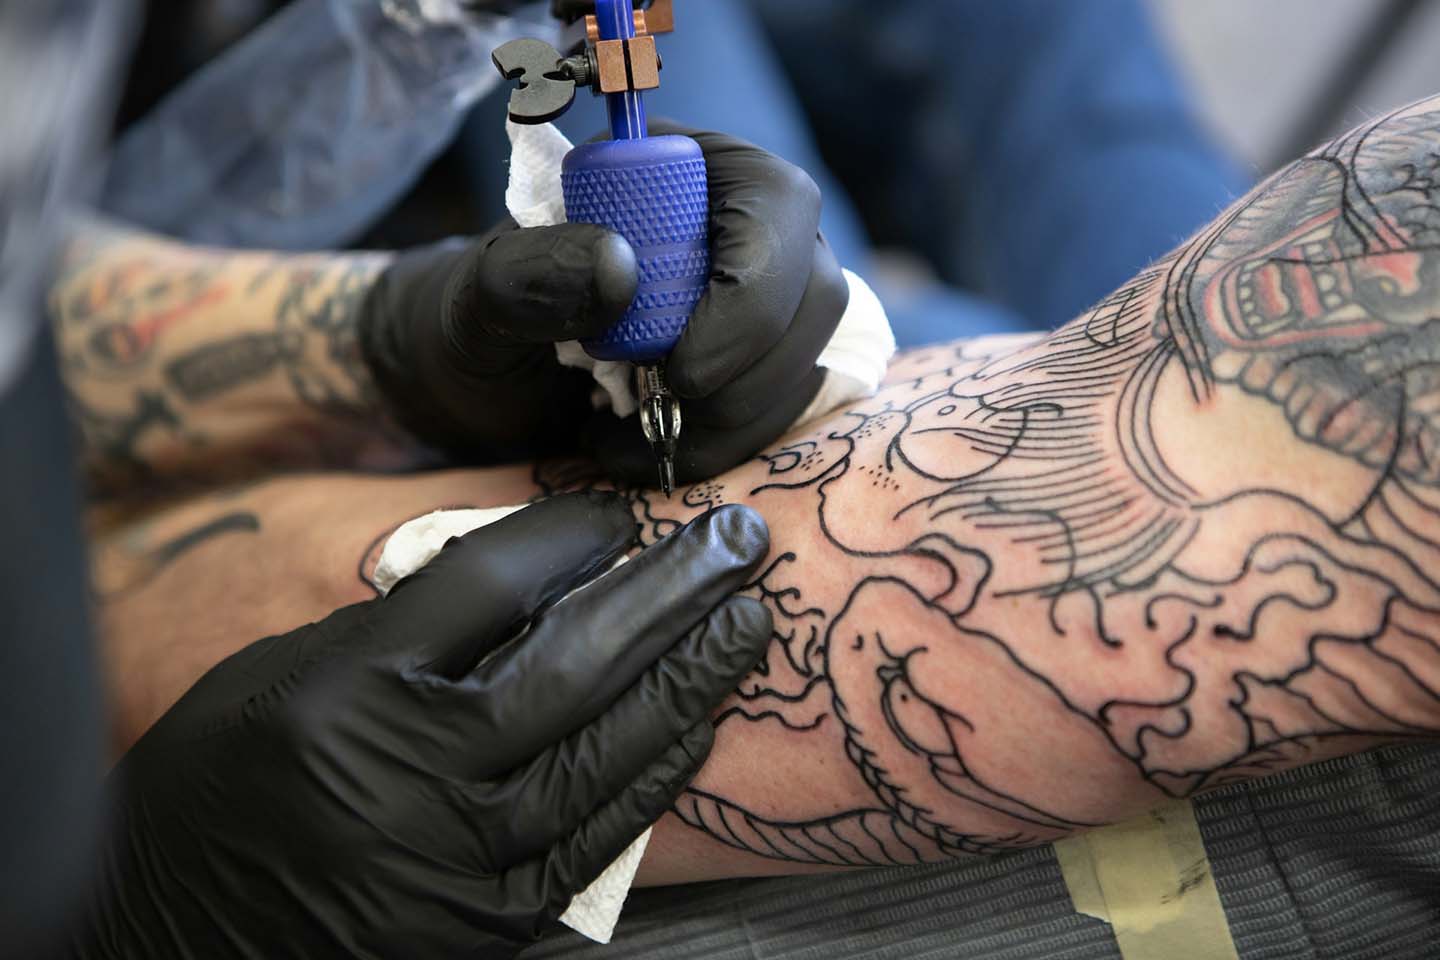 Tattoo artist wearing black gloves while doing tattoo on someone's arm with black ink